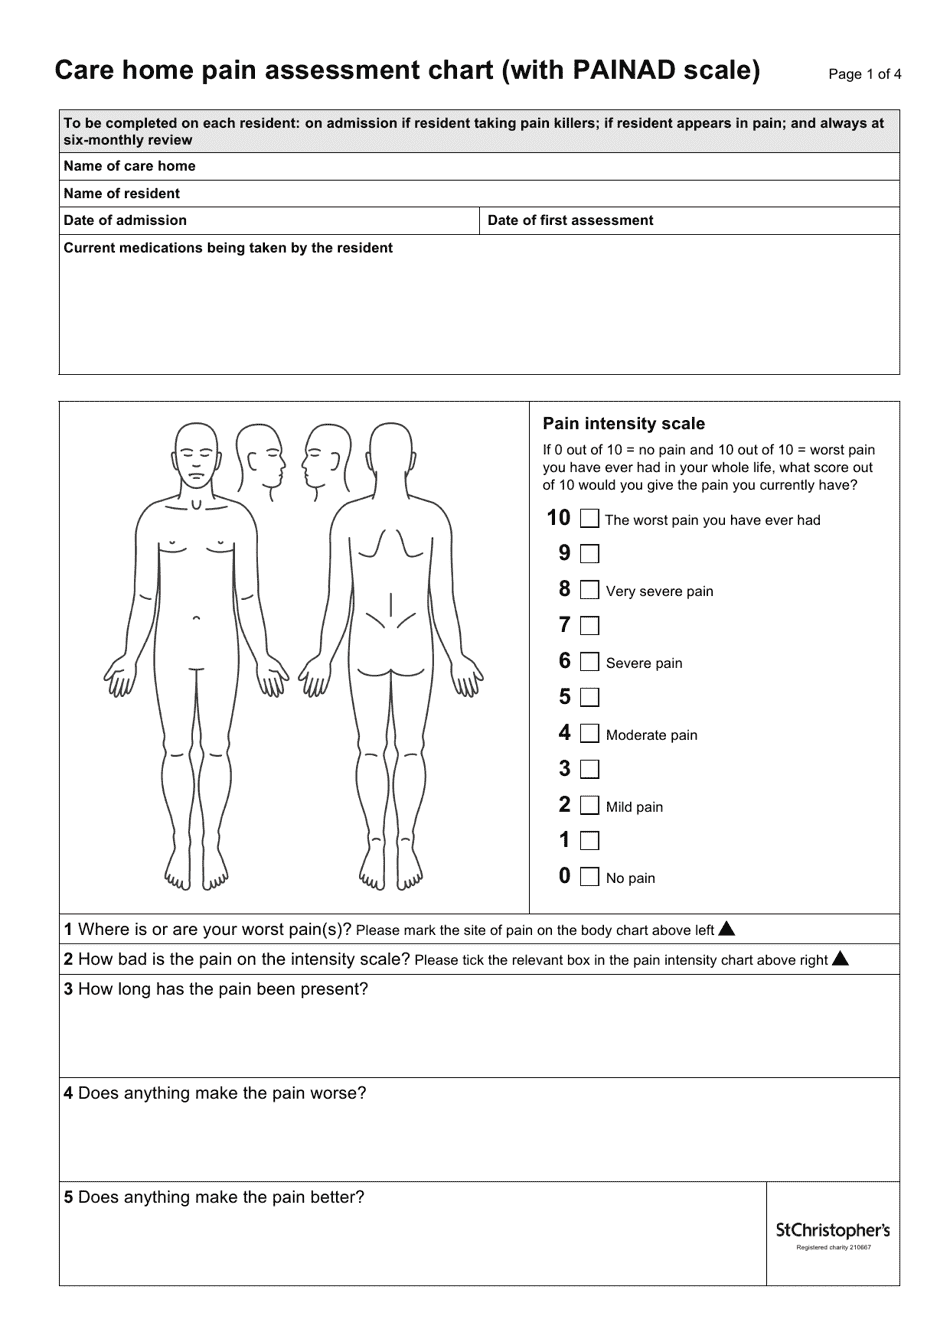 Care Home Pain Assessment Chart (With Painad Scale) Download Printable ...